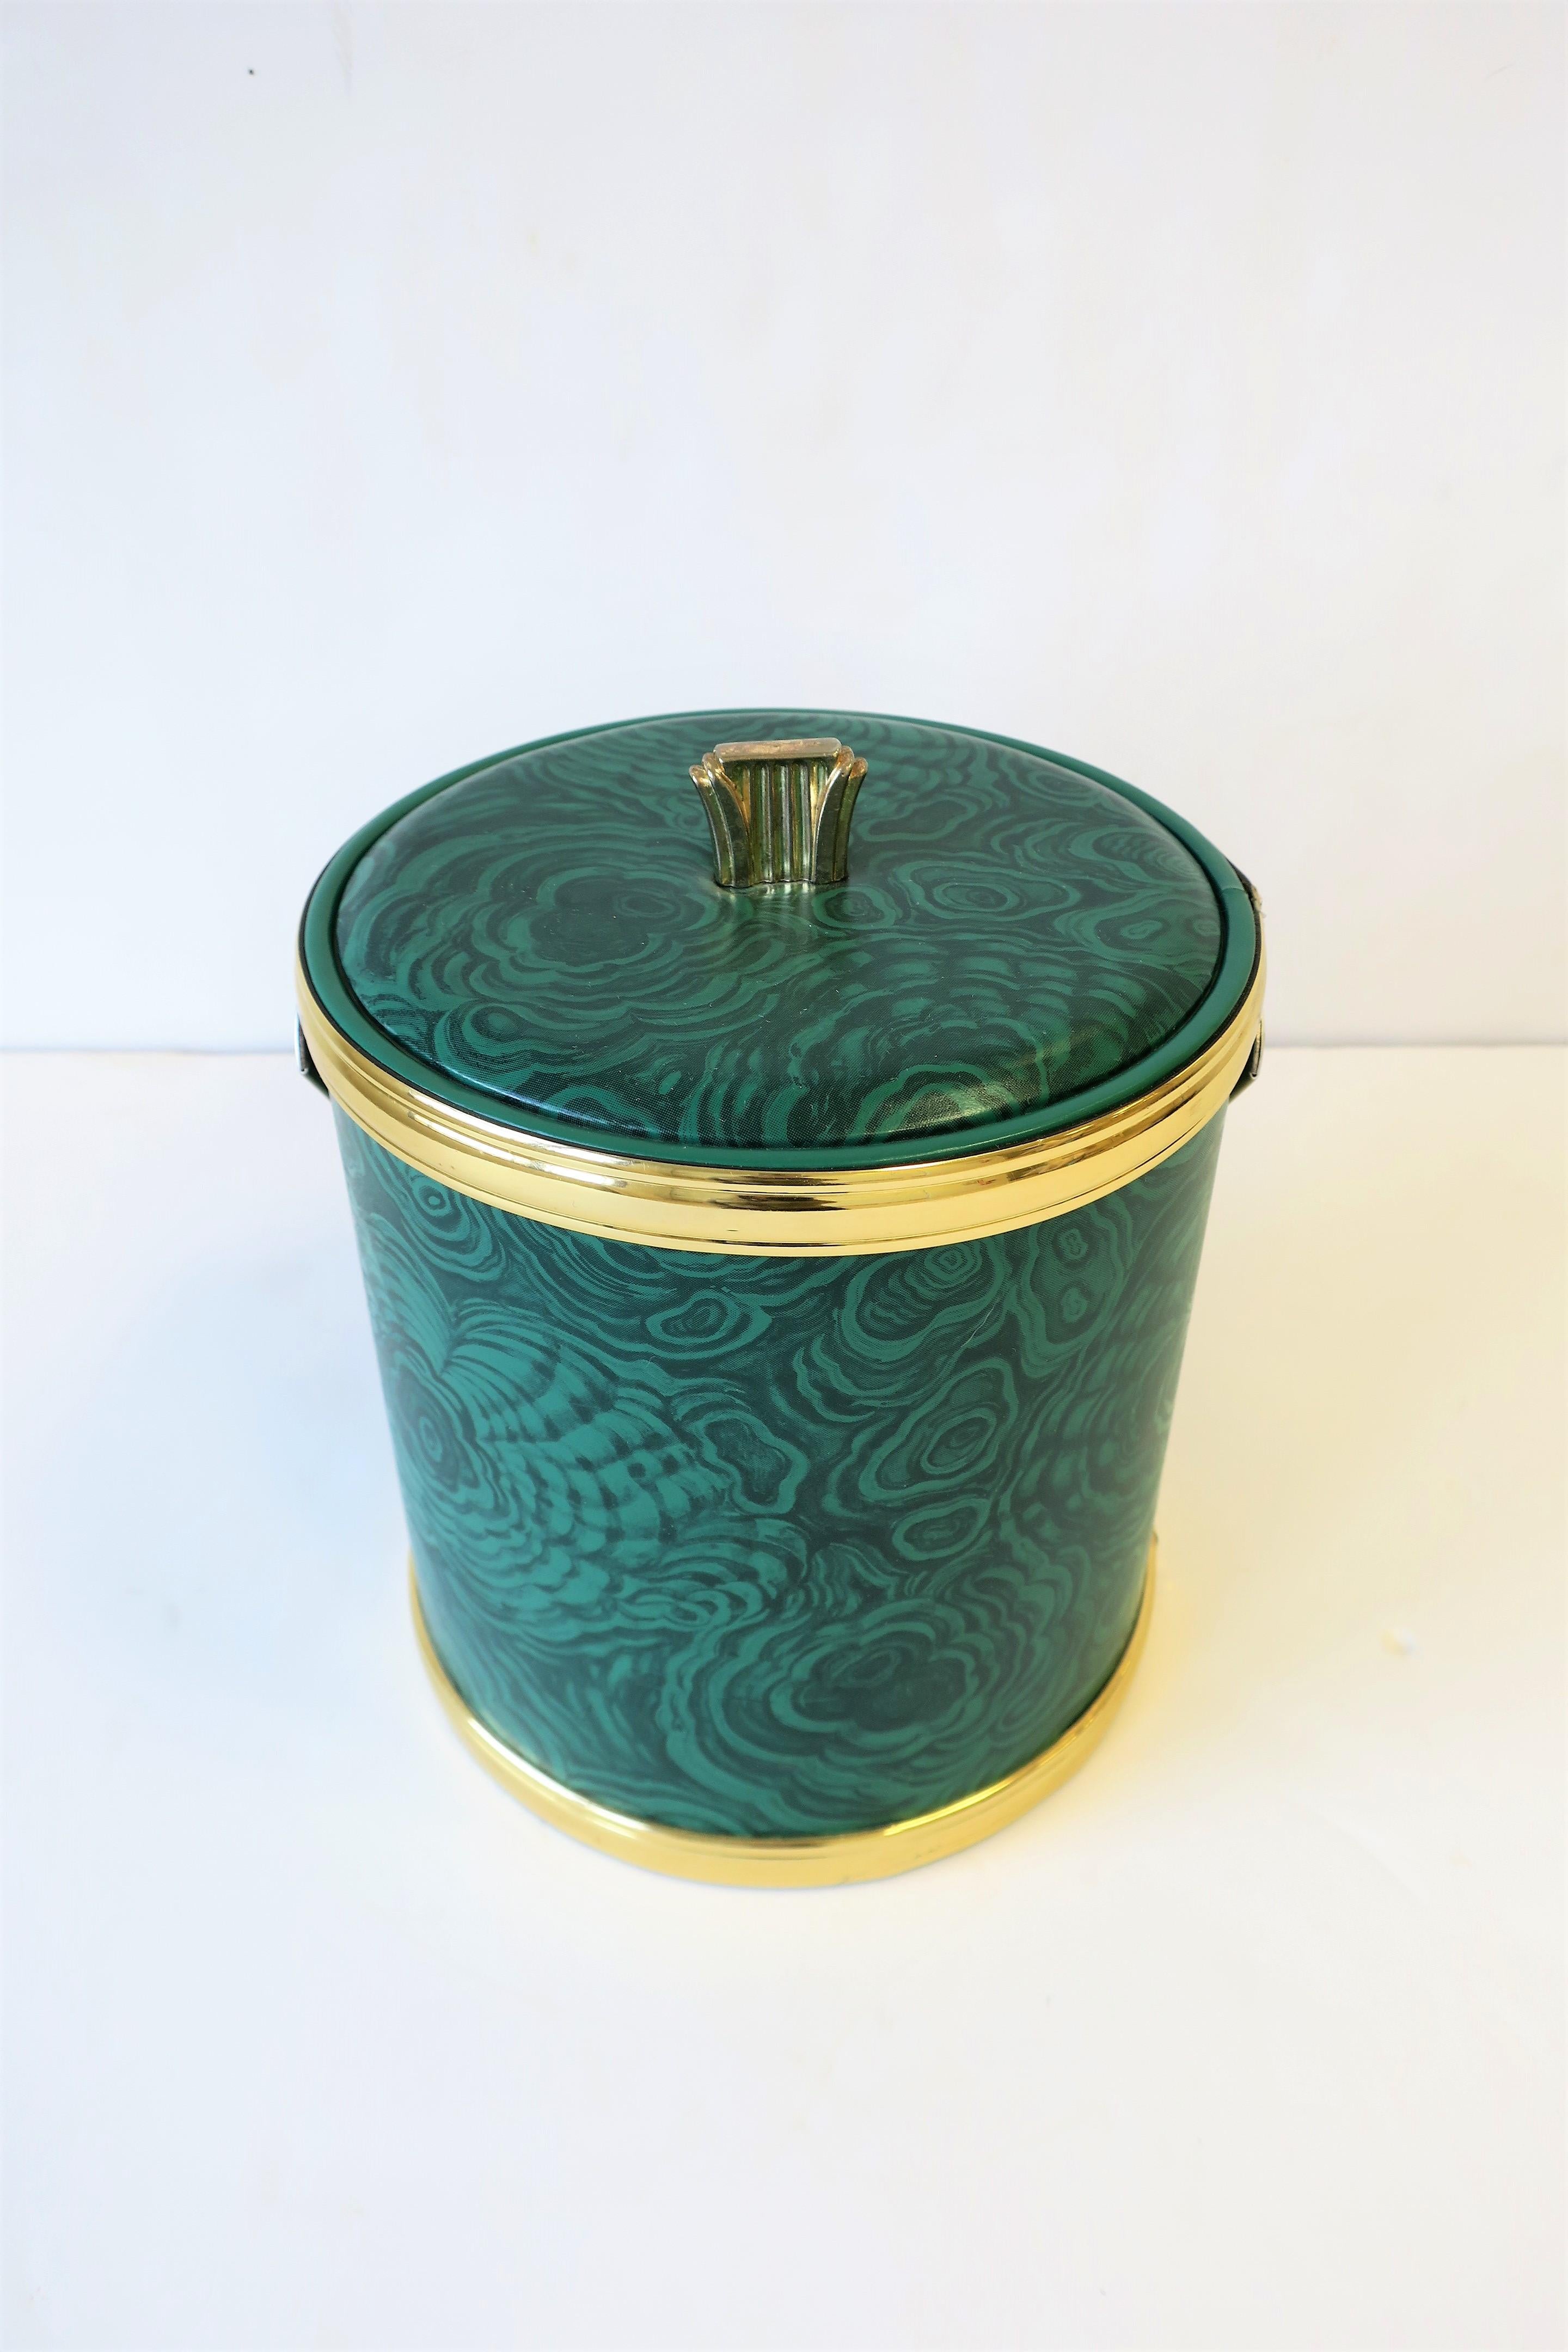 Plated Green Malachite Style Ice Bucket by Georges Briard, ca. 1970s